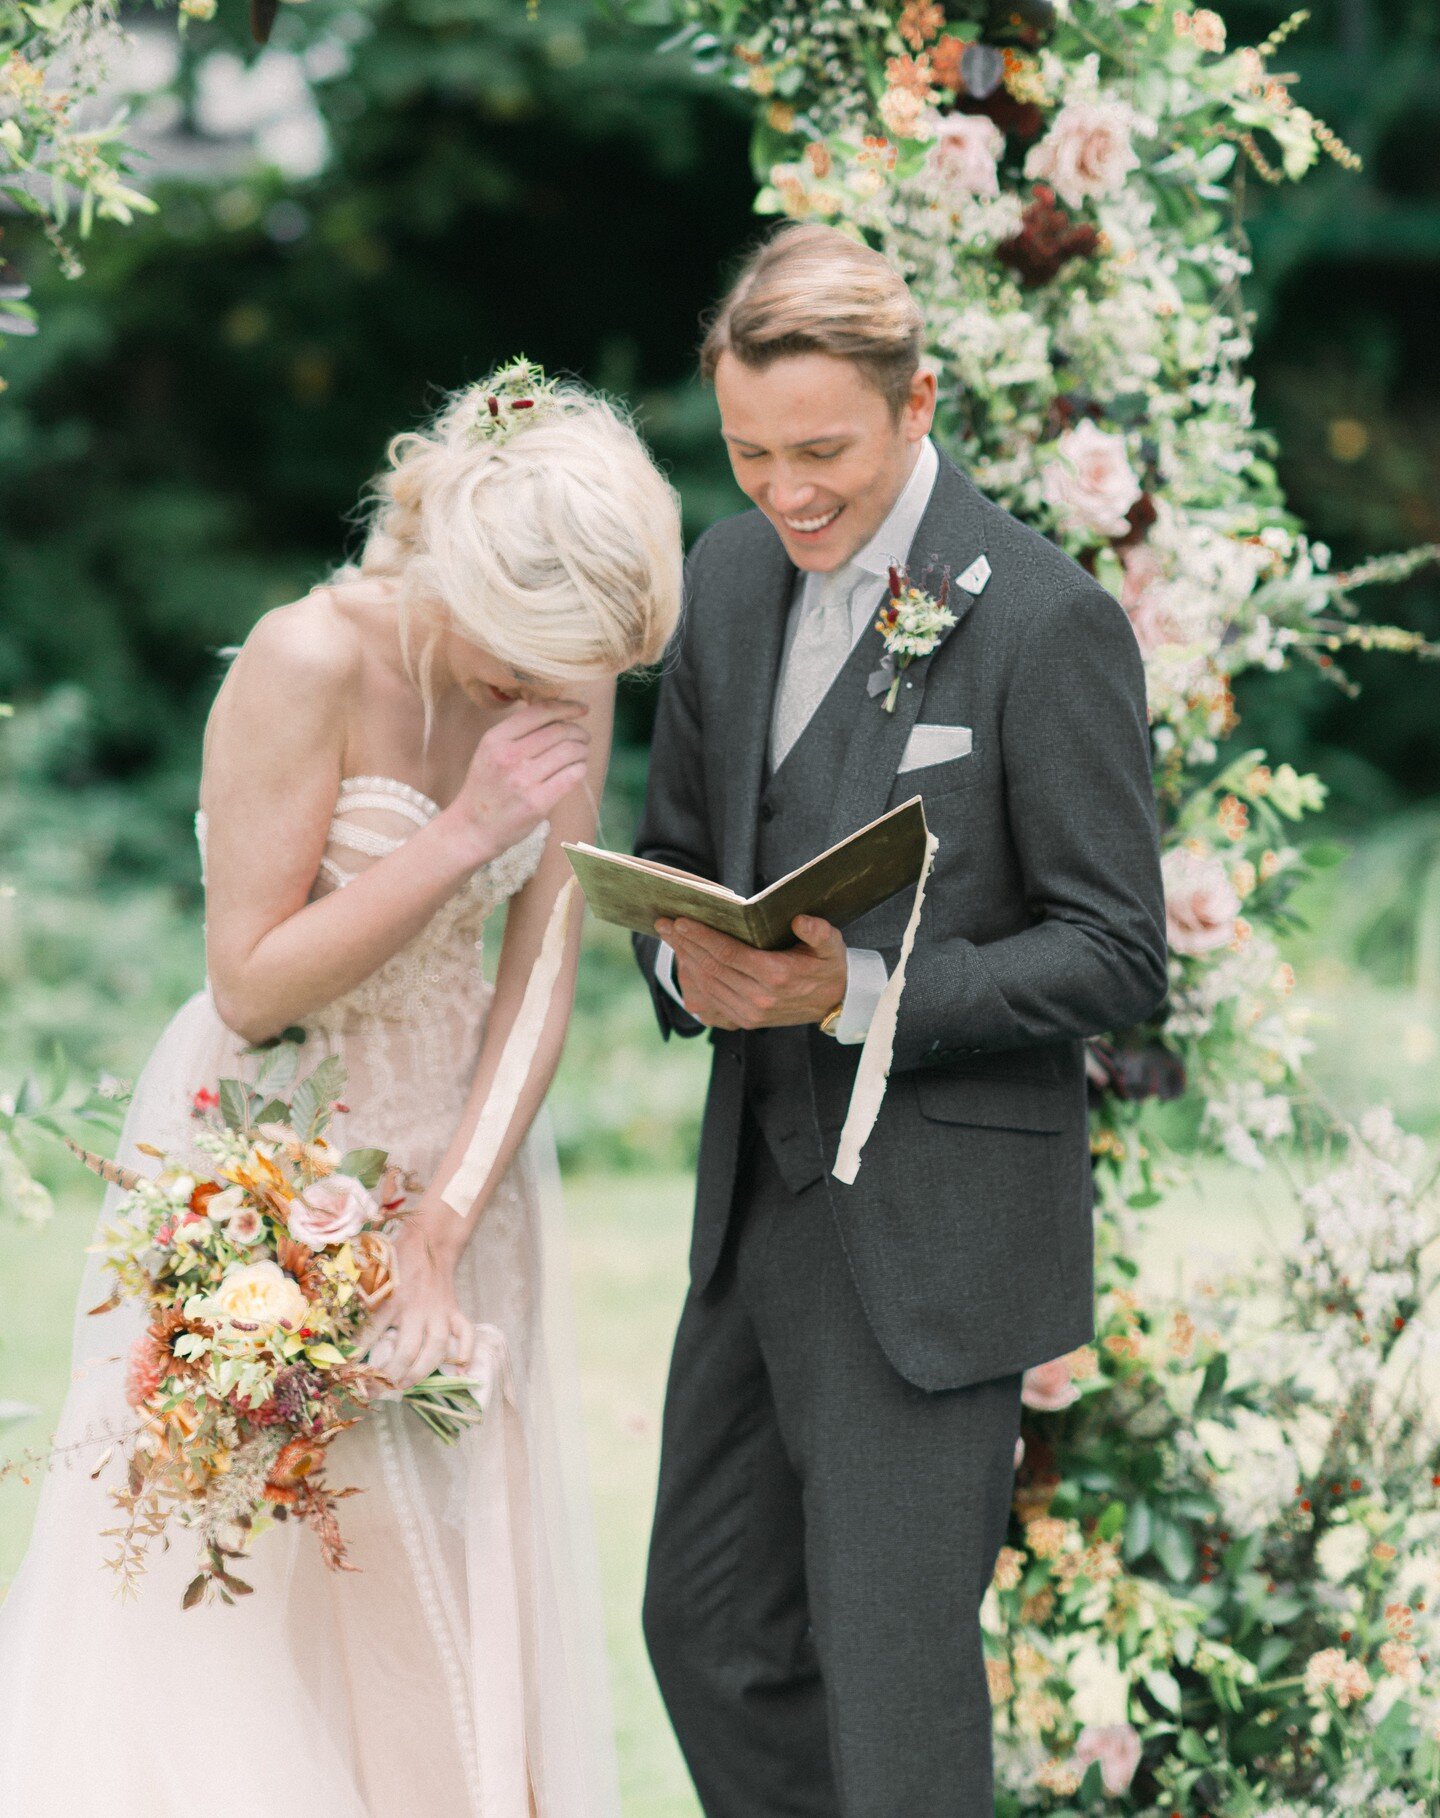 When doing your personal vows why not invest in a velvet vow book holder... also don't forget to make your bride smile. Flower arch, a blush wedding dress and some loose flowers with trailing ribbon - so stylish.
#chicboho #bohostyle #thatdress #fine